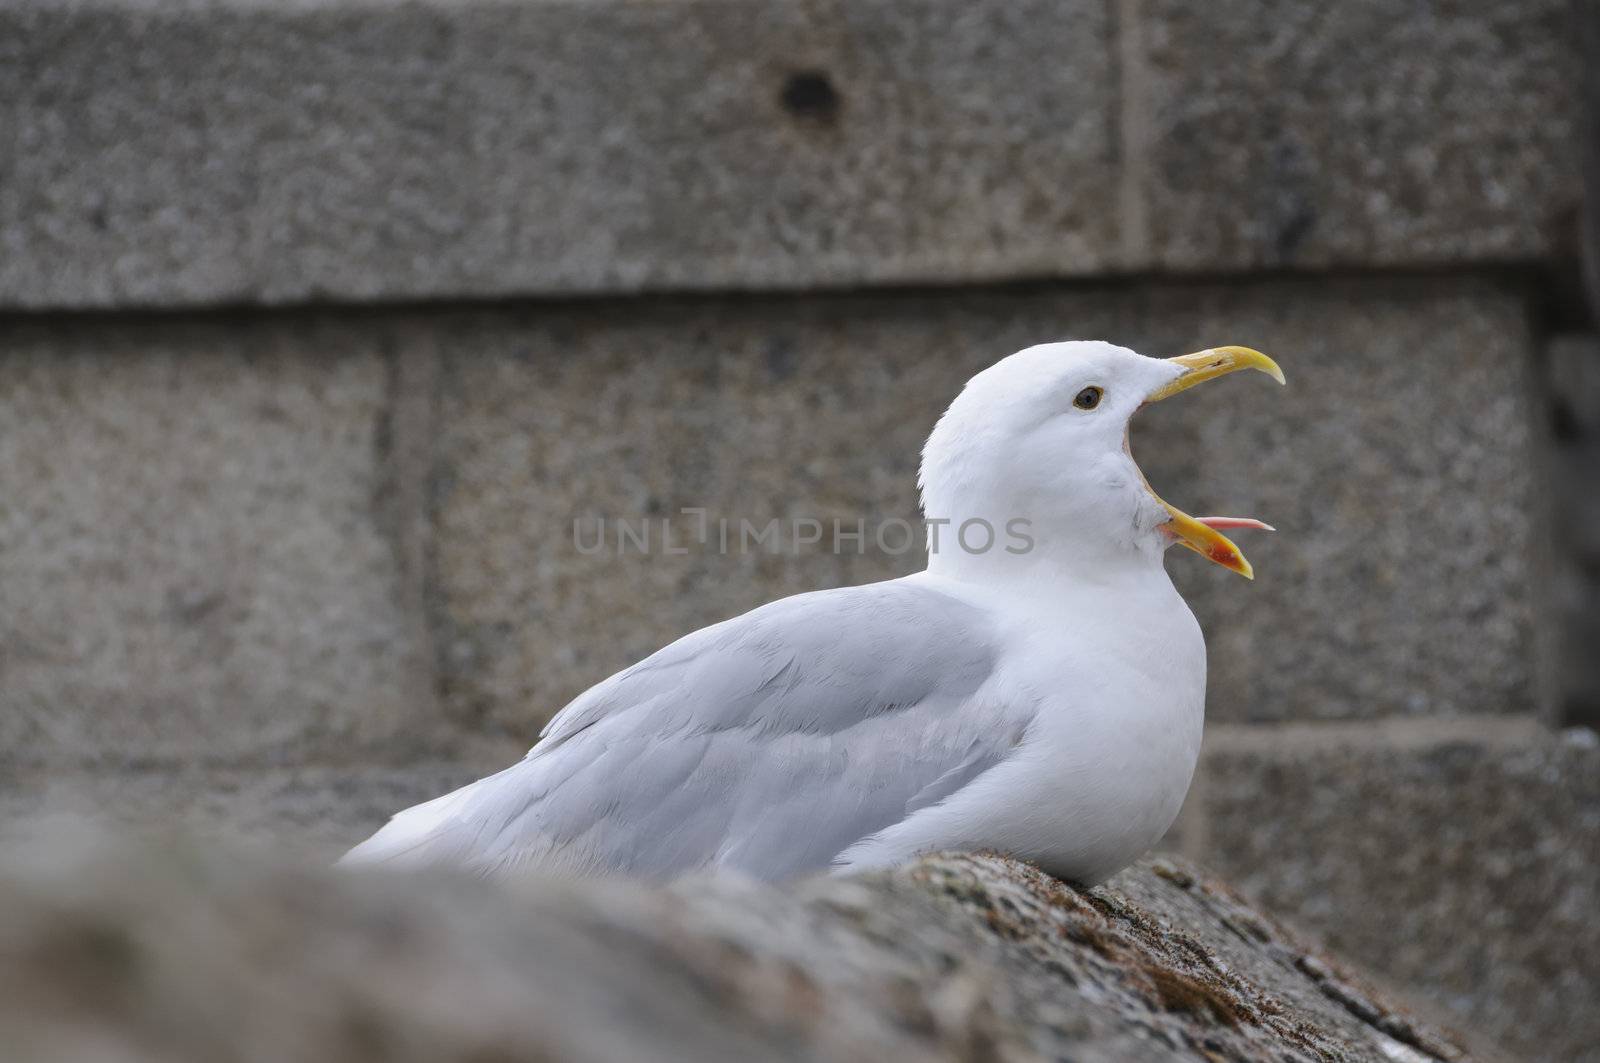 Seagull sitting on wall screaming with beak wide open.